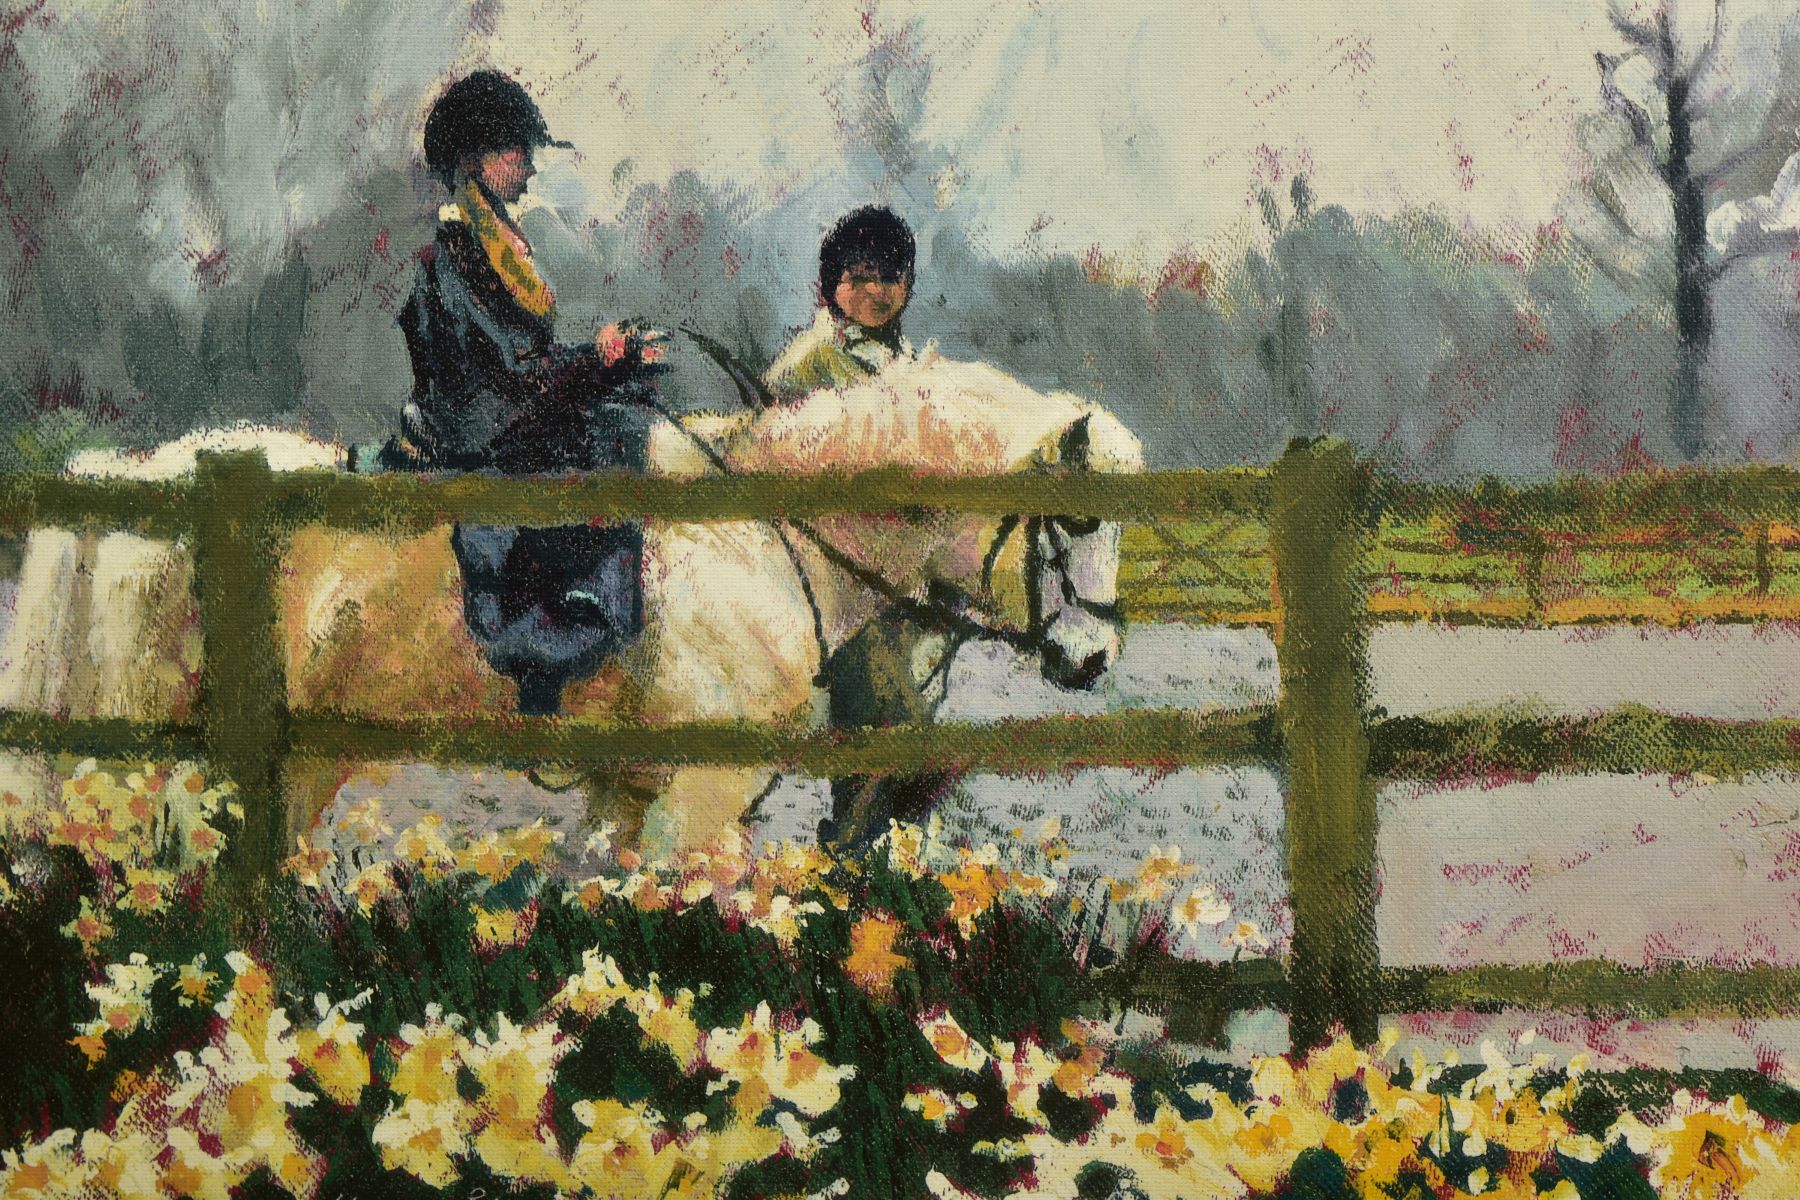 ROLF HARRIS (AUSTRALIAN 1930), 'RIDING IN THE SPRING', a limited edition print of a child riding a - Image 4 of 16